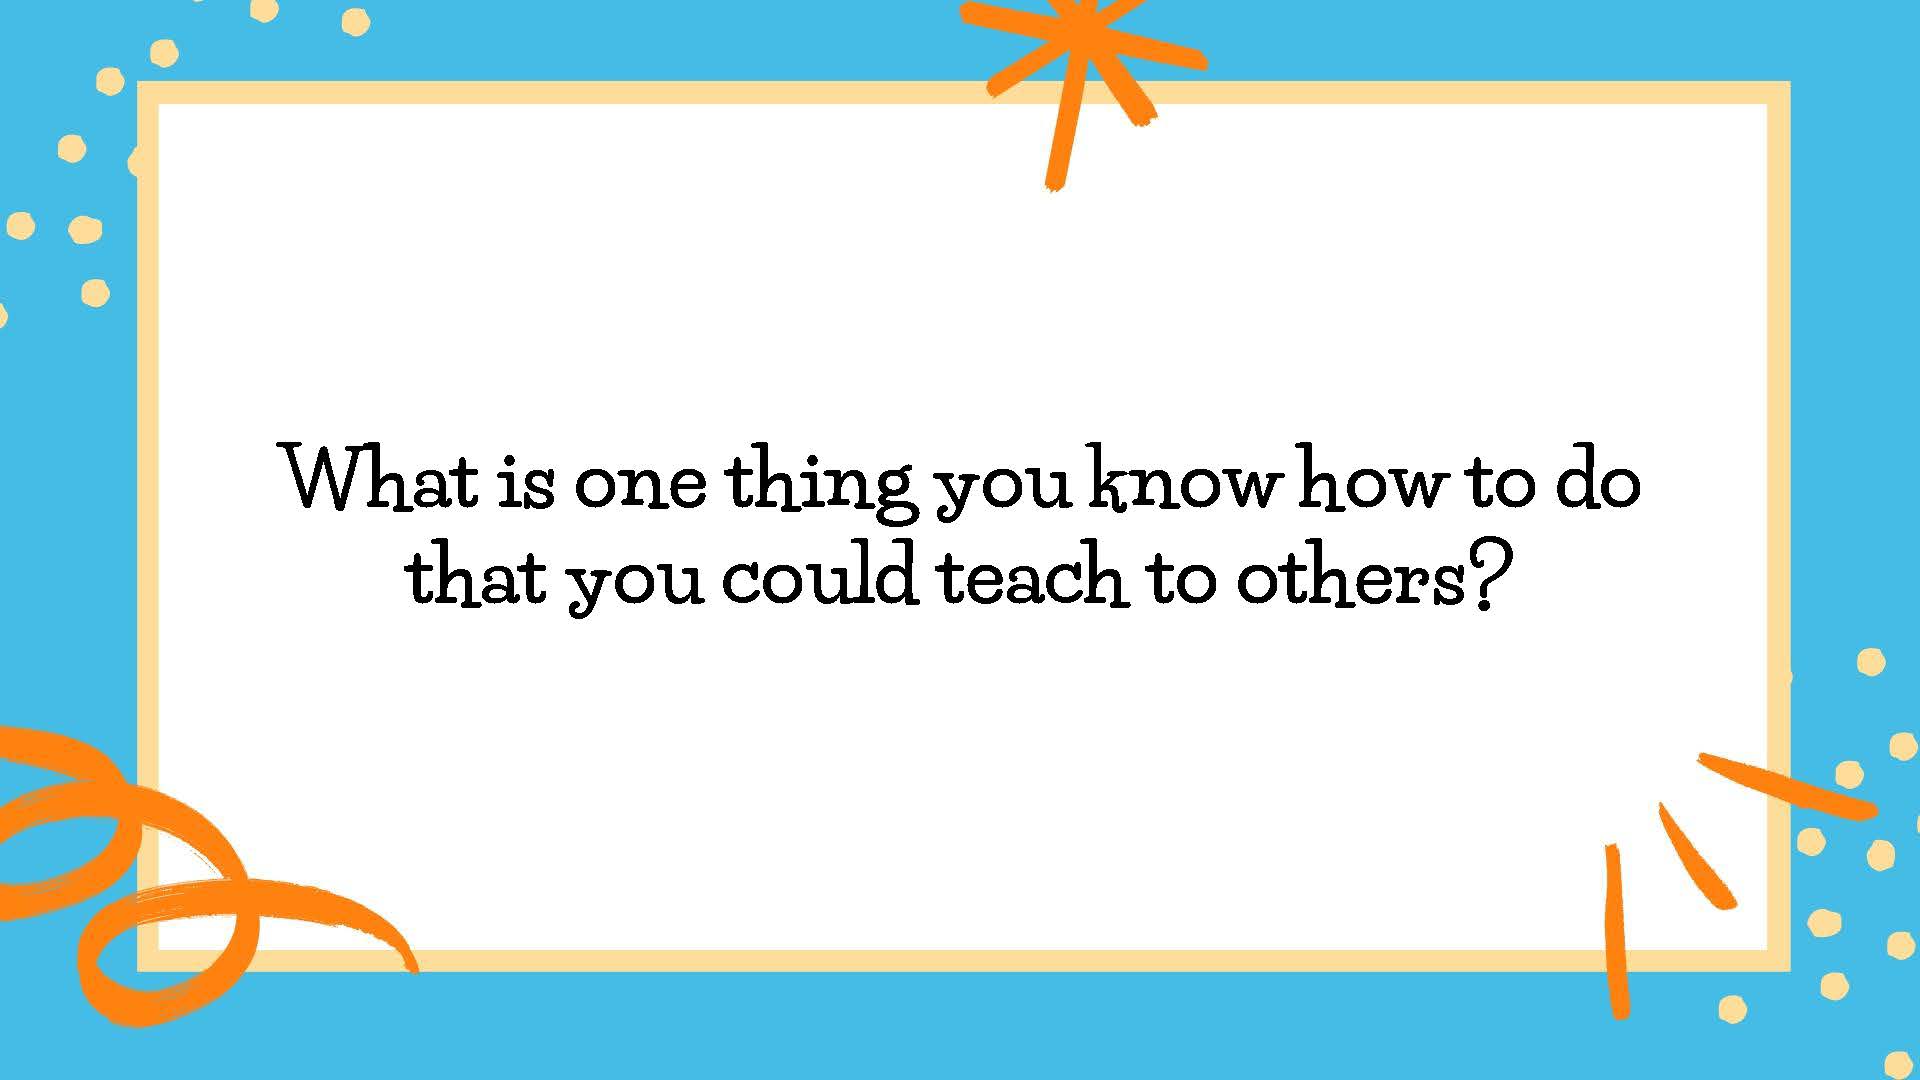 What is one thing you know how to do that you could teach to others?